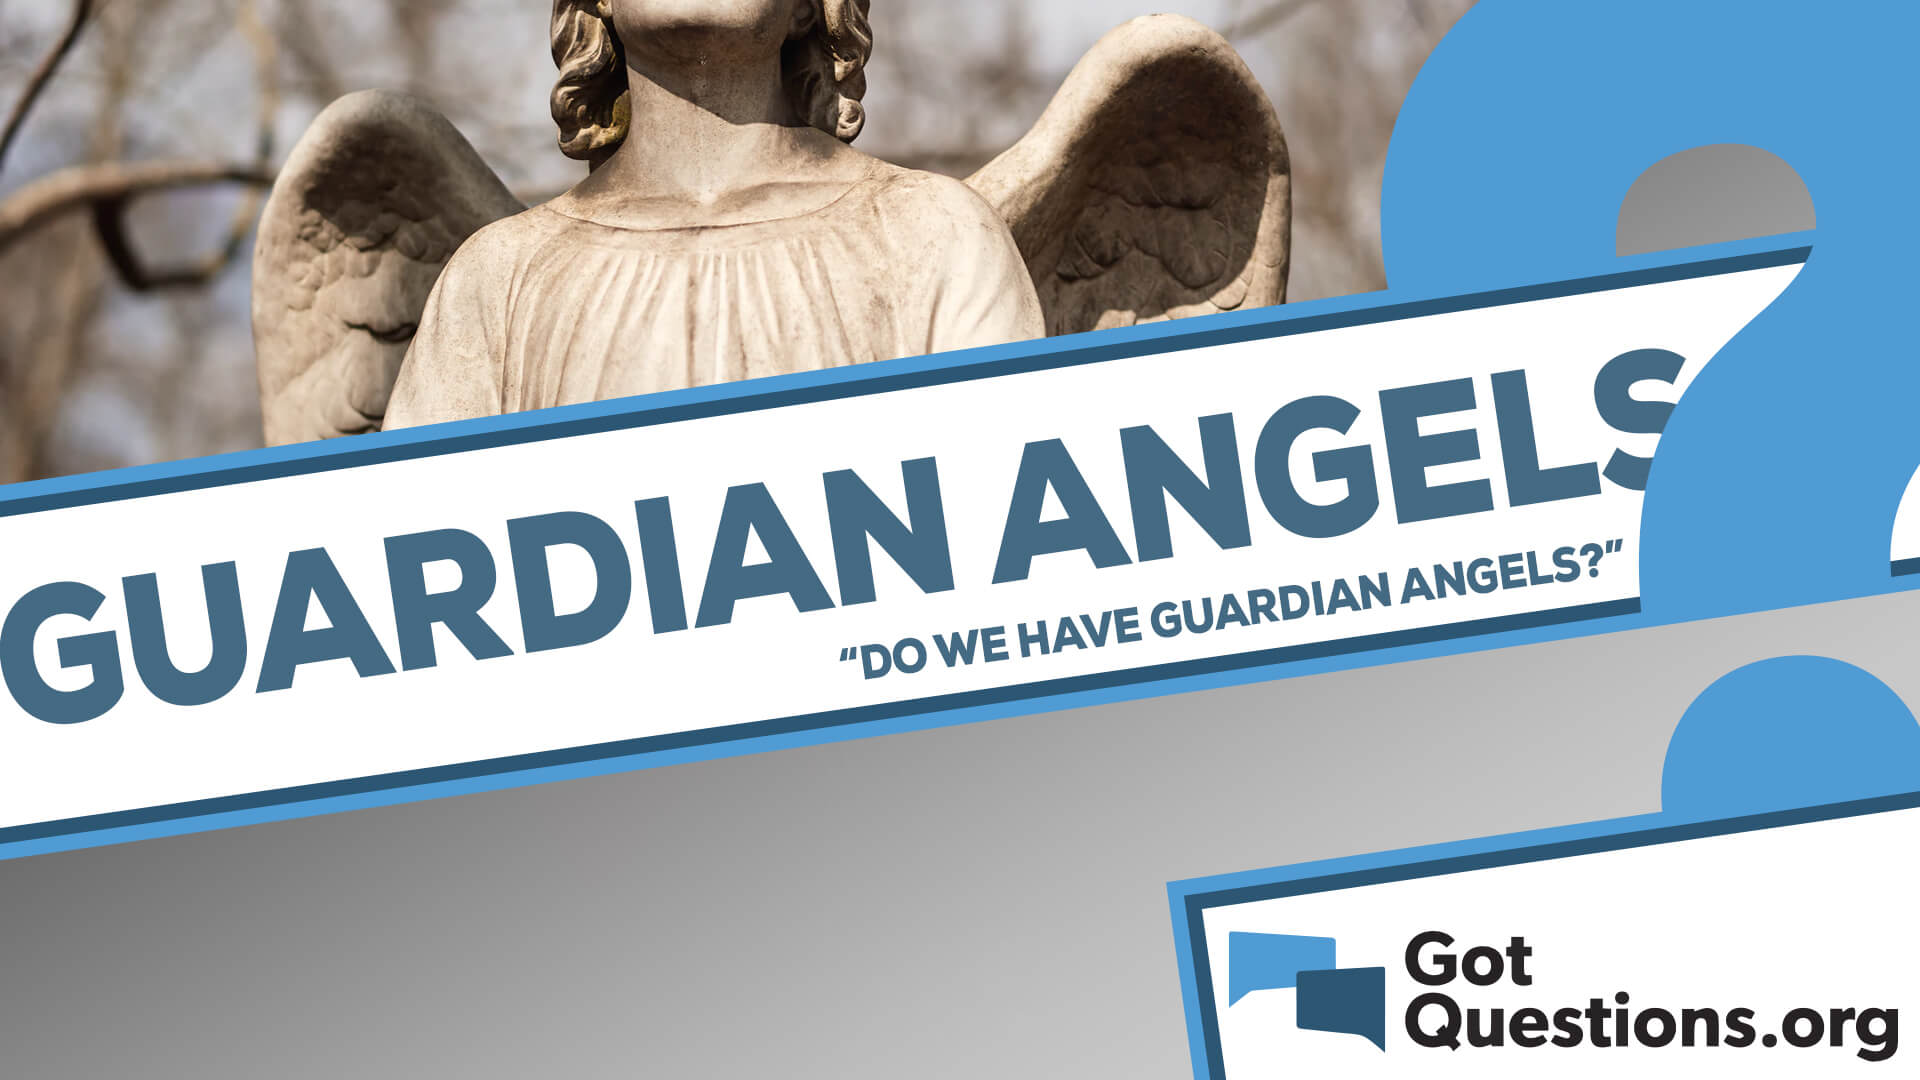 Do we have guardian angels?